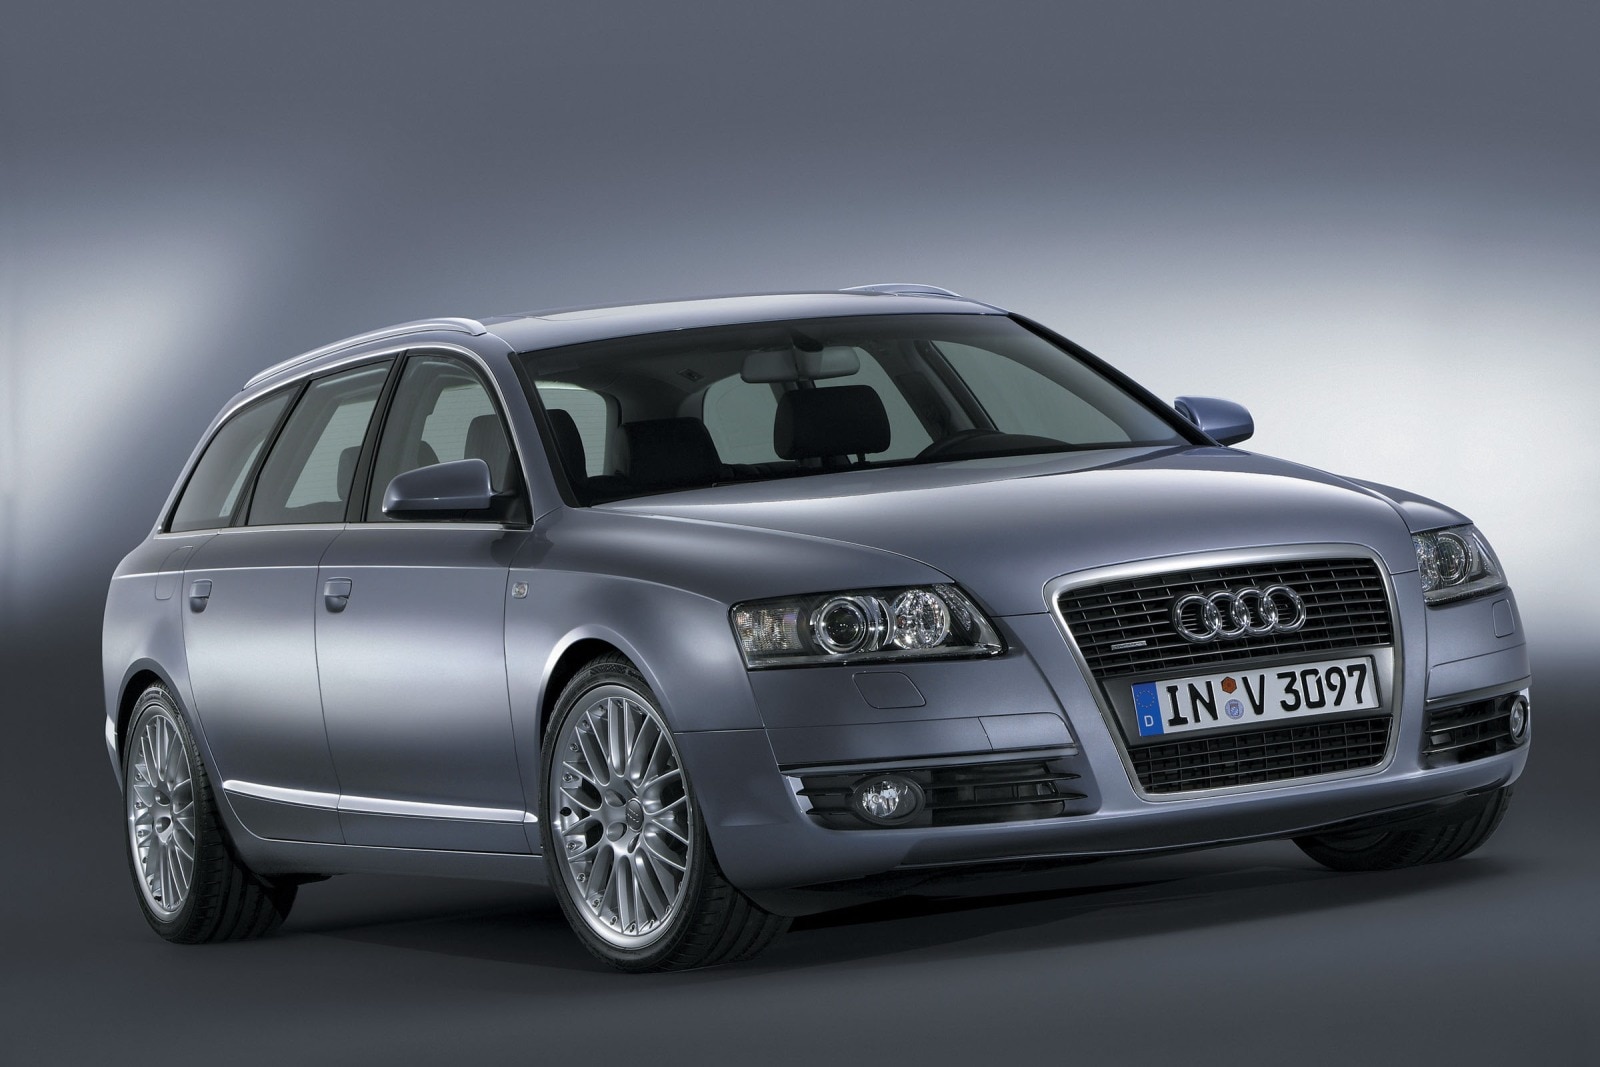 Used 2007 Audi A6 Wagon Review | Edmunds